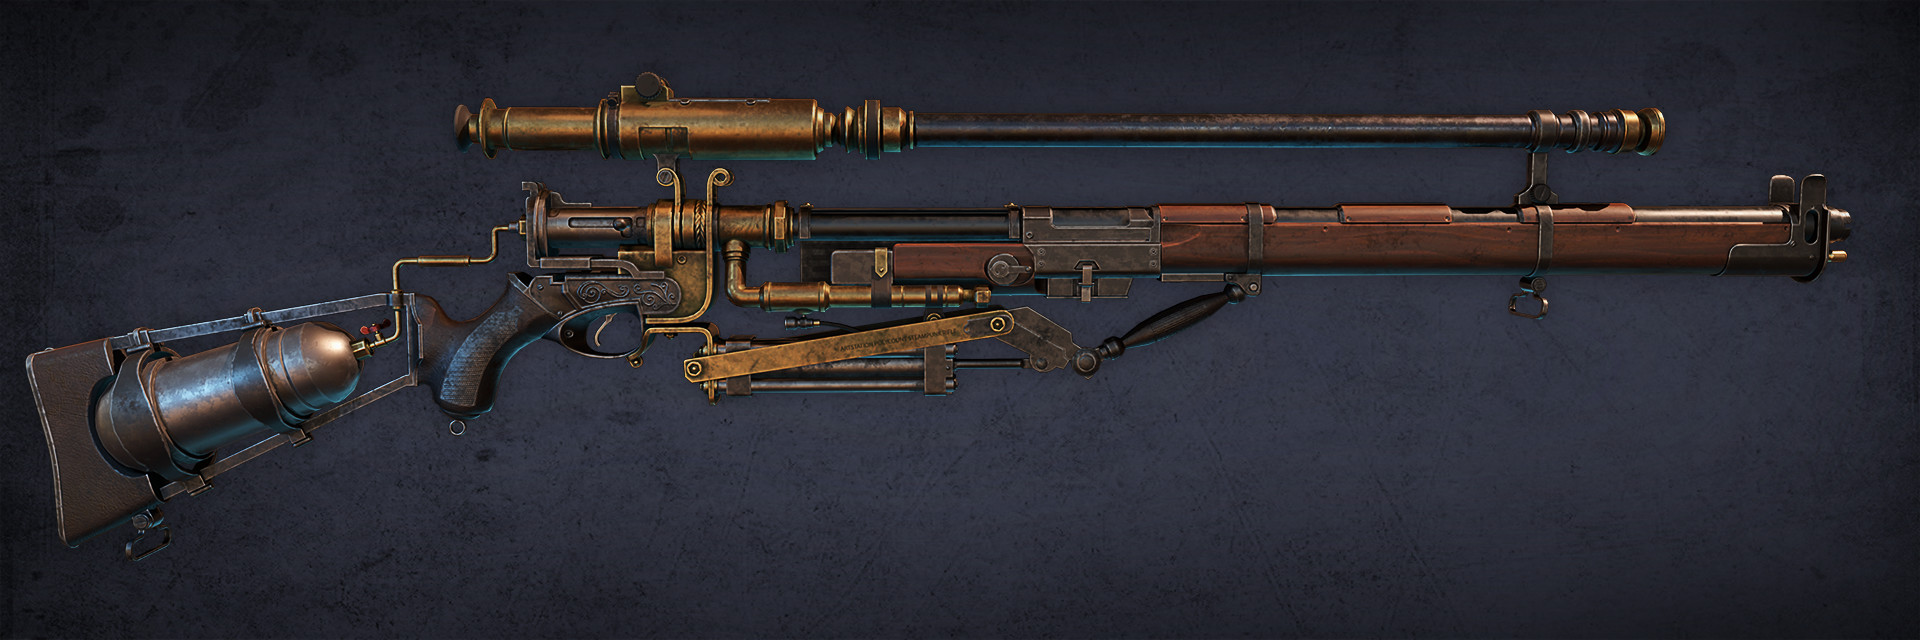 The order 1886 the pneumatic Rifle